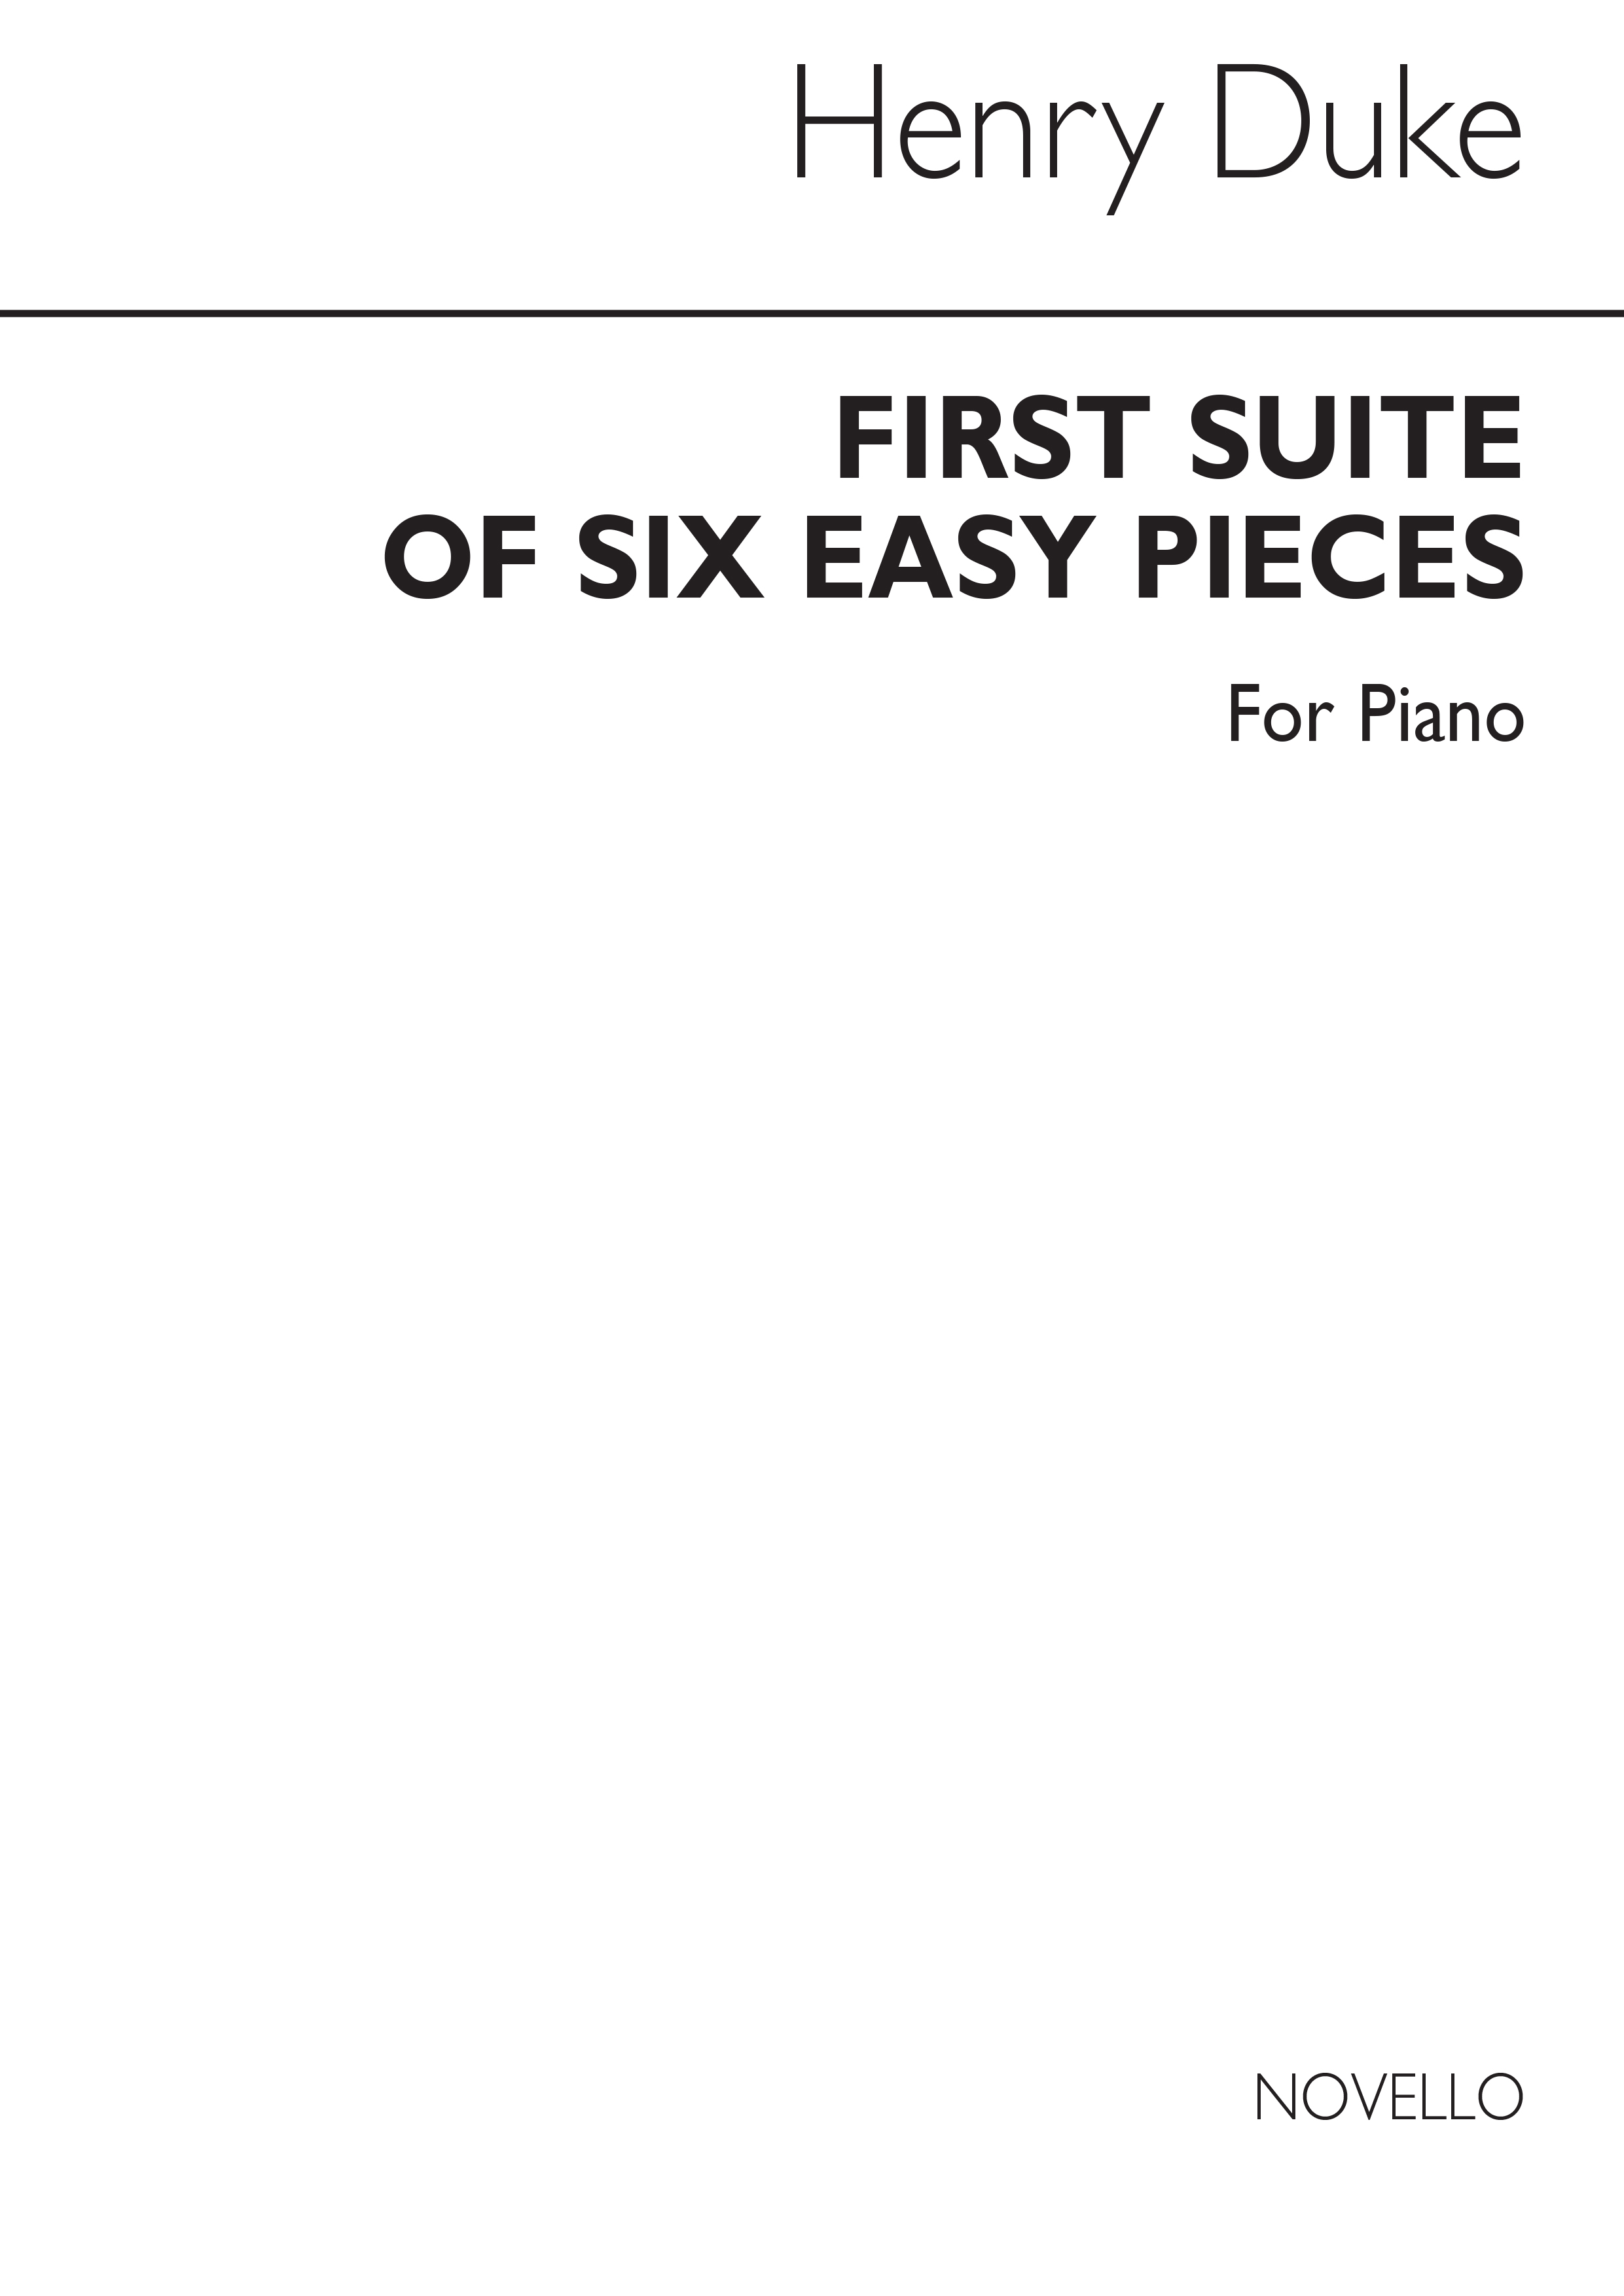 Duke: First Suite Of Six Easy Pieces for Piano